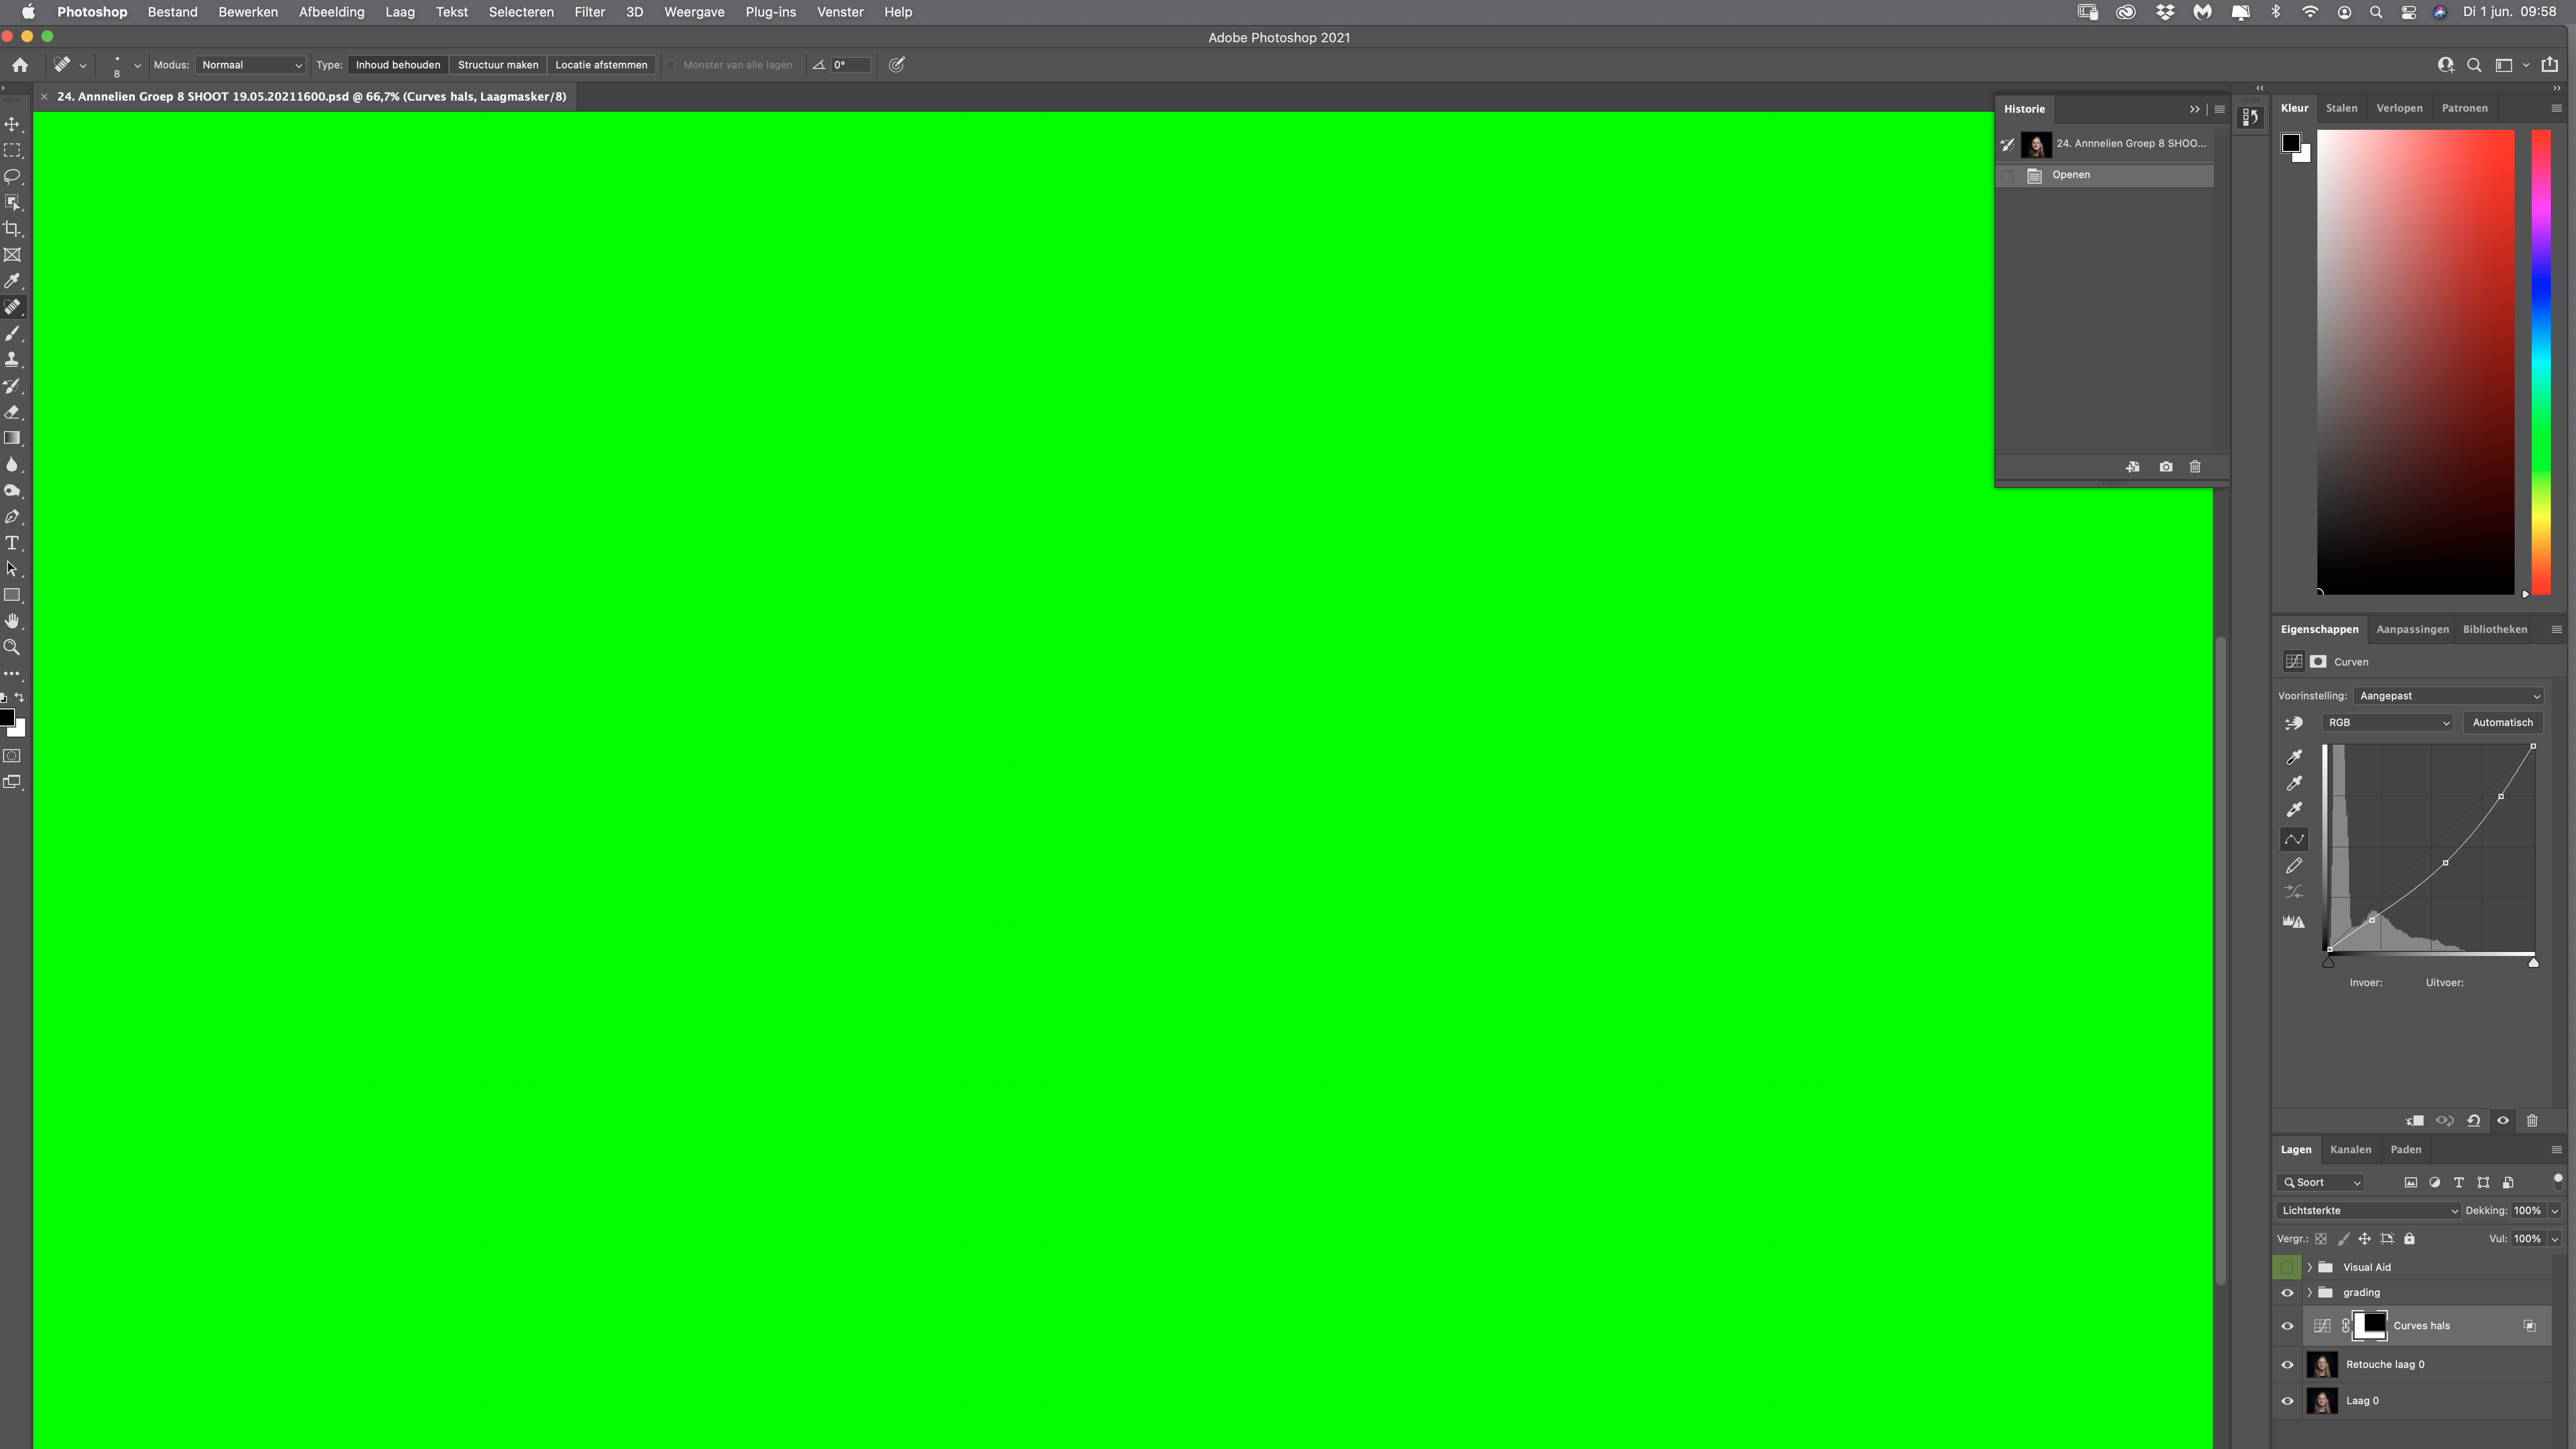 Solved: Entire Photoshop screen turns neon green - Adobe Support Community  - 12155329